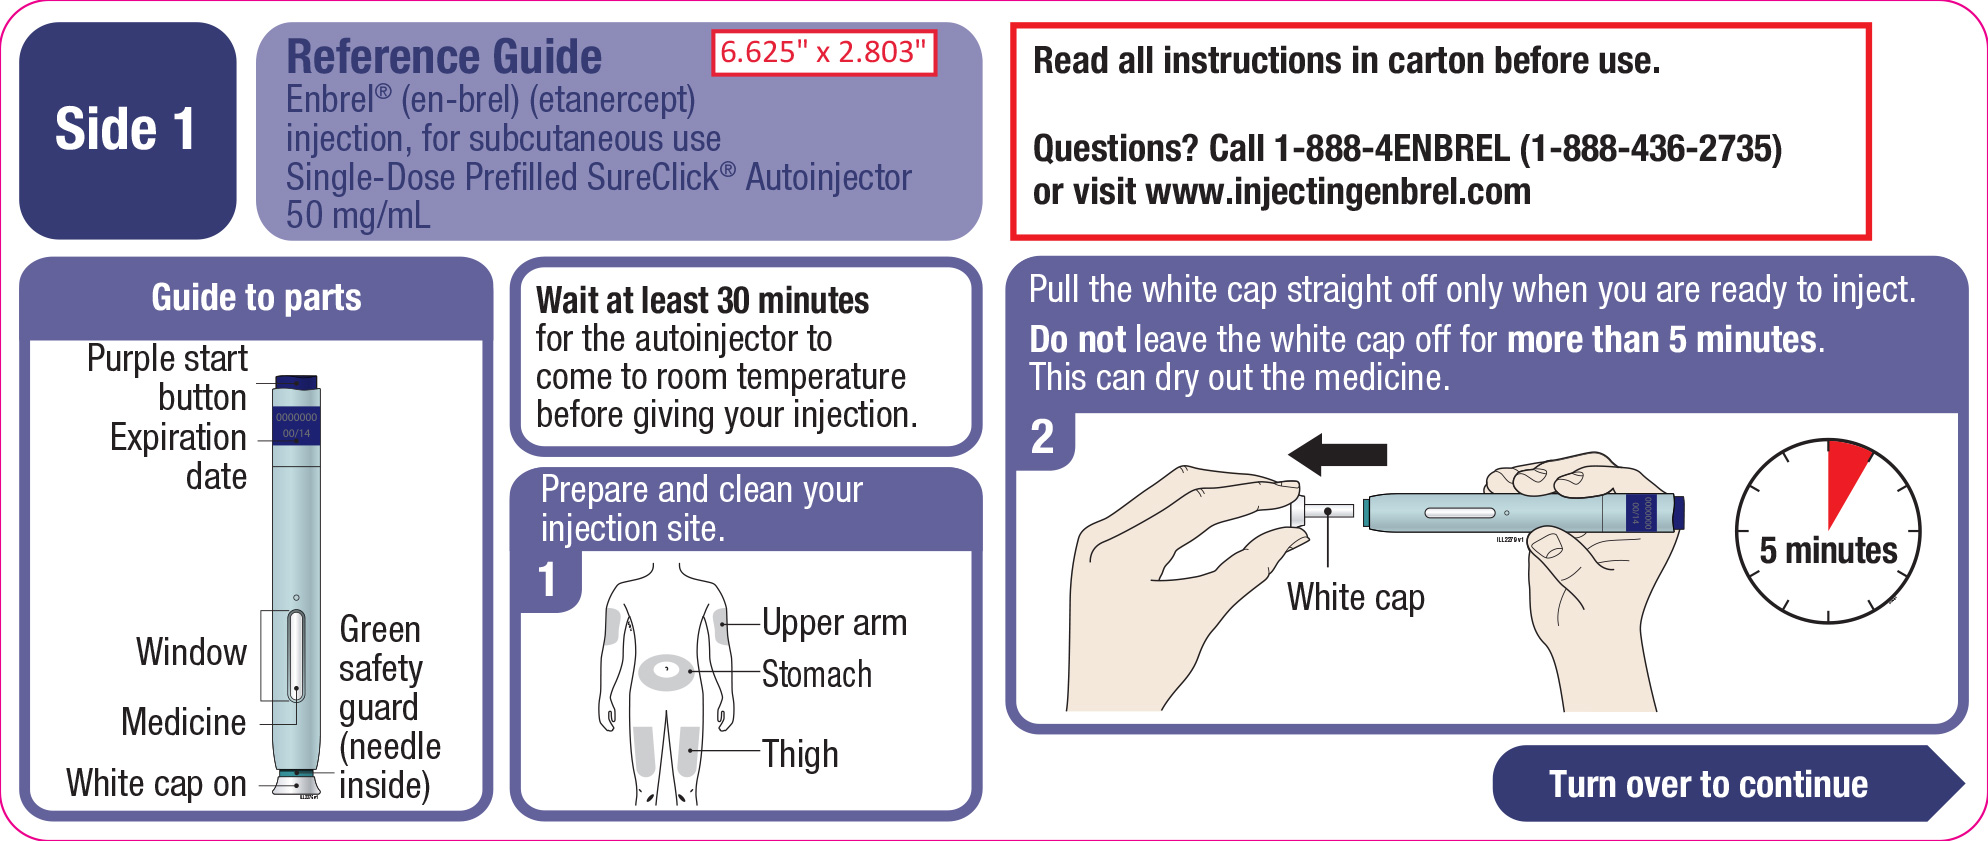 The SureClick® Autoinjector quick reference guide to parts and injection instructions. Please read all instructions in carton before use